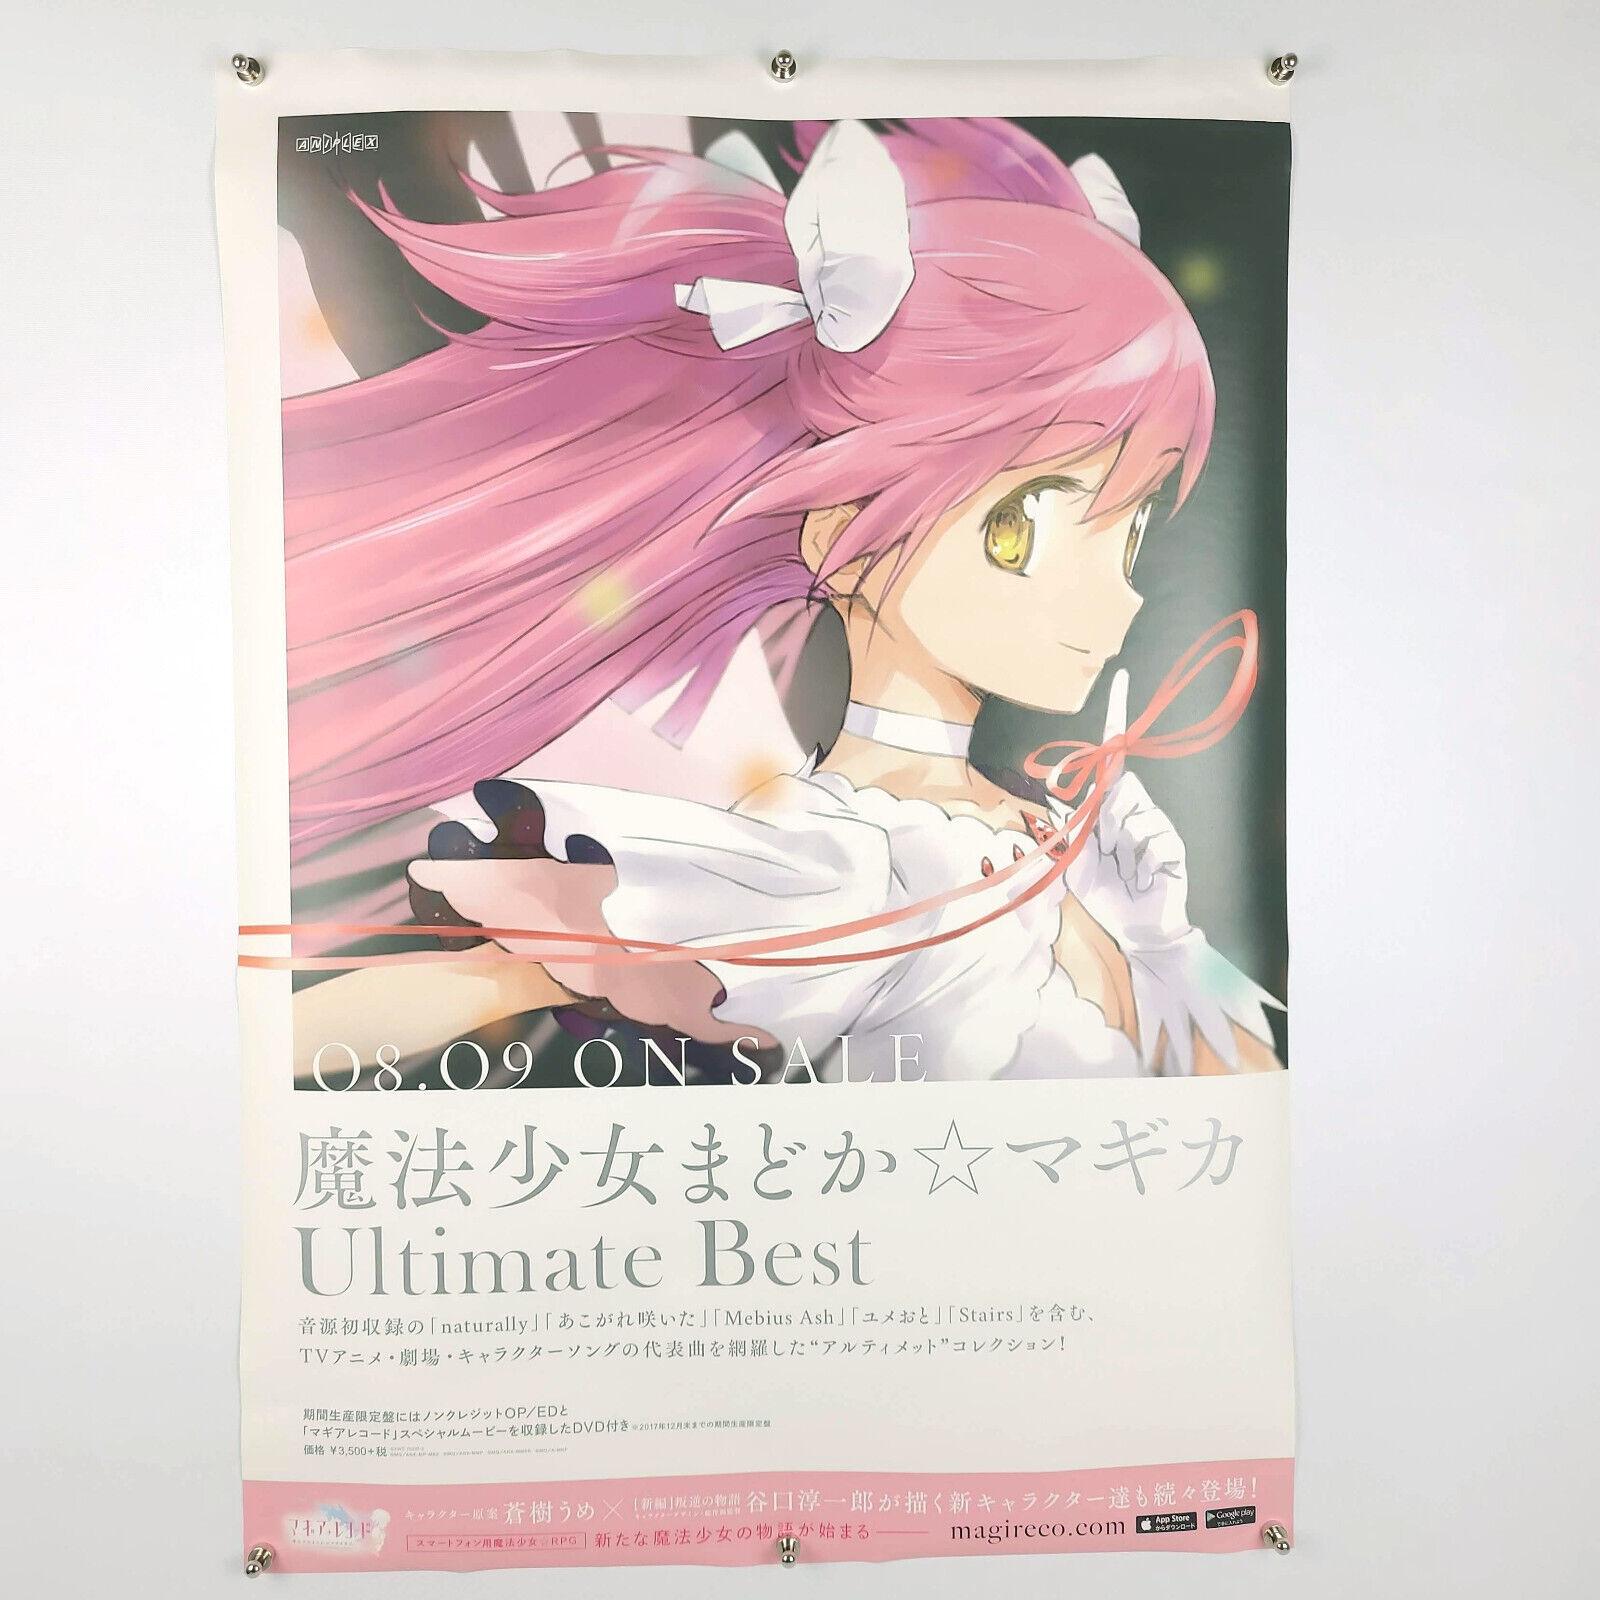 Madoka Magica Ultimate Best B2 Poster Promotion Anime Aniplex Rare - US SELLER